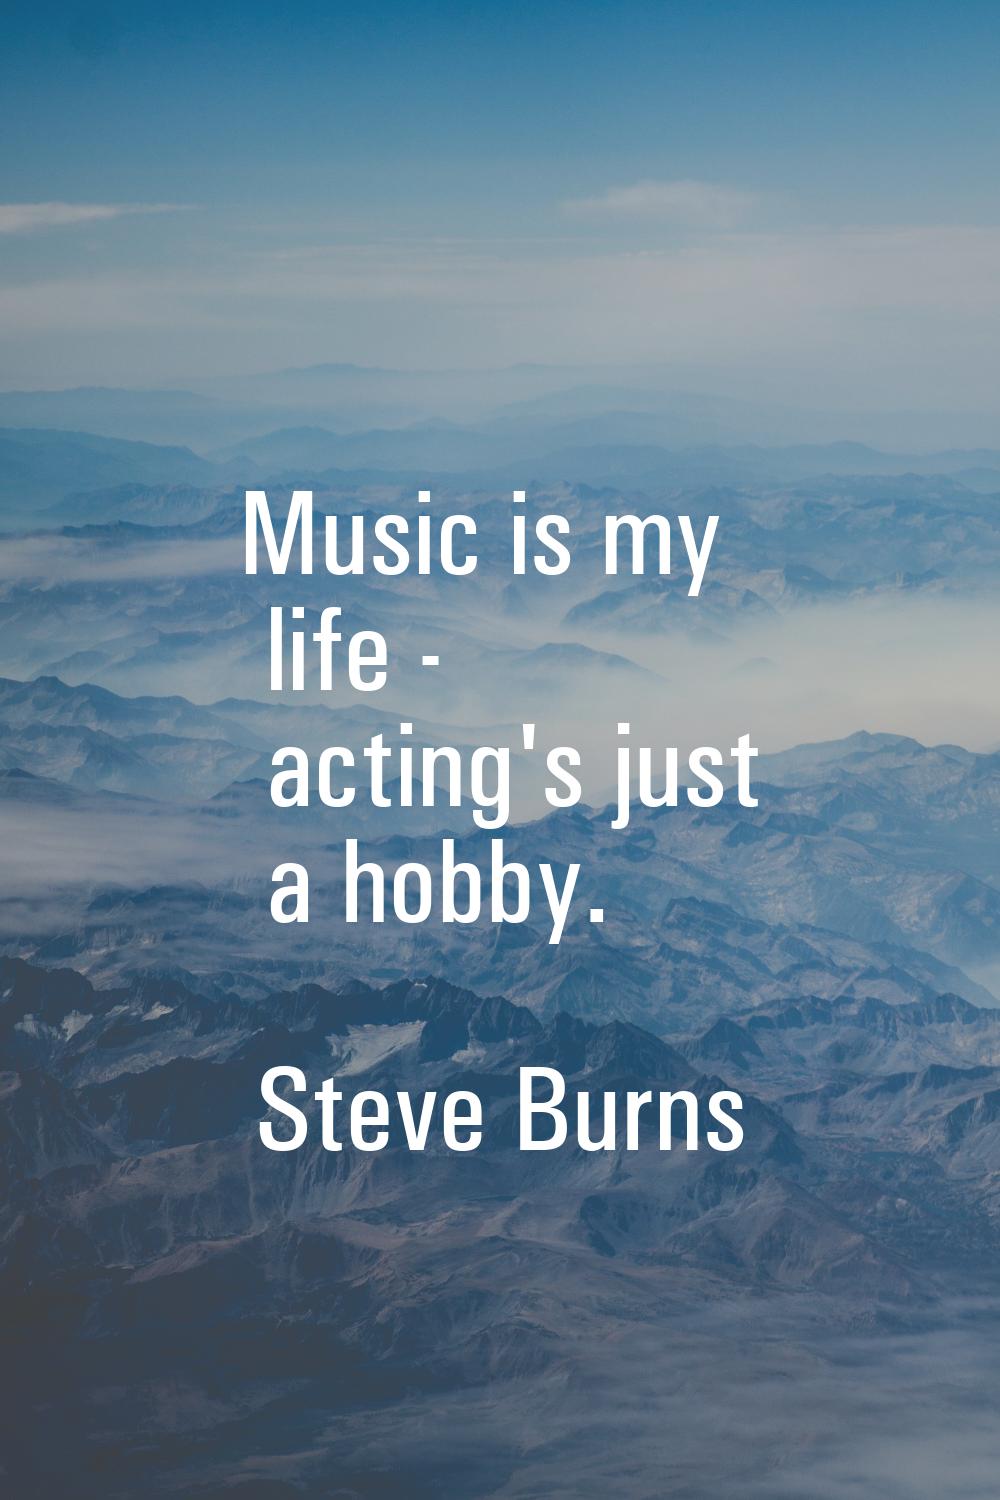 Music is my life - acting's just a hobby.